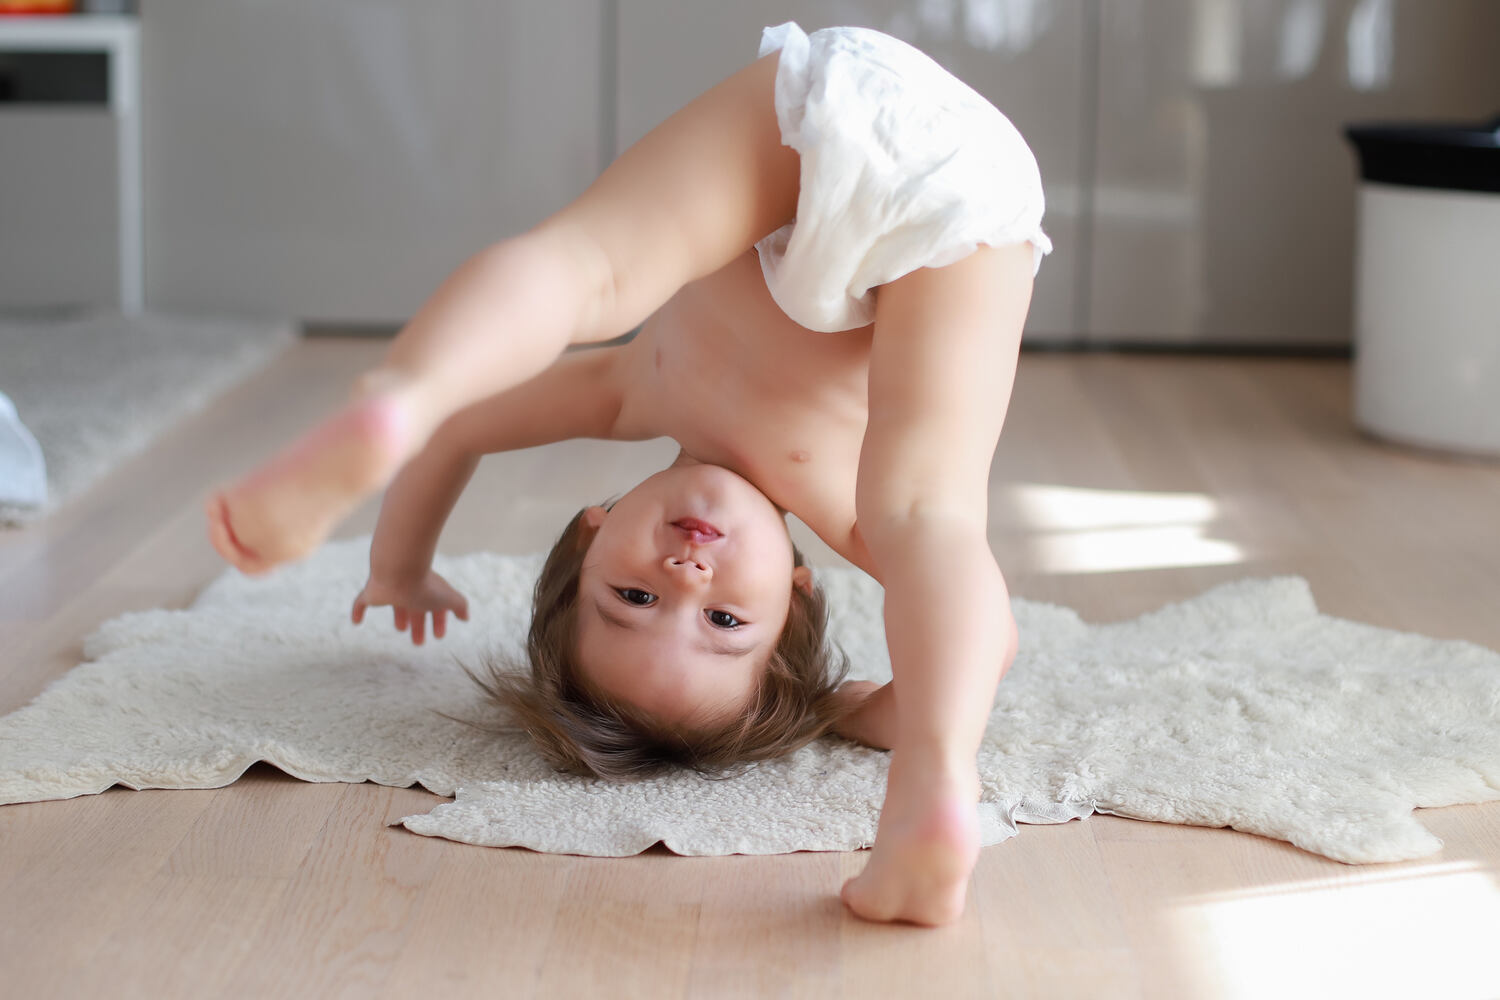 What to do when your toddler touches their genitals